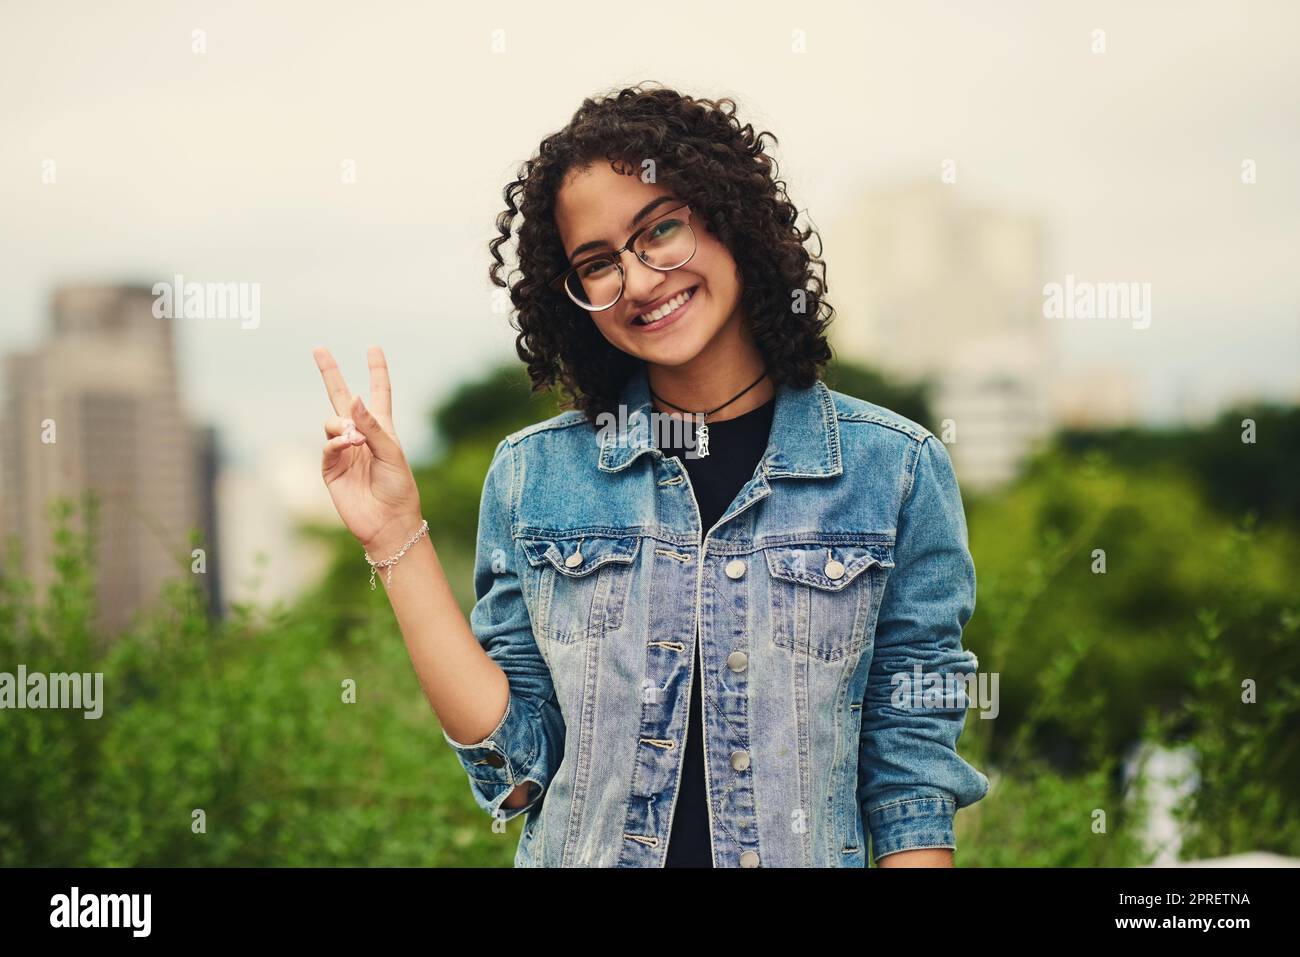 Wishing you peace, love and happiness. Portrait of a beautiful teenage girl outdoors. Stock Photo